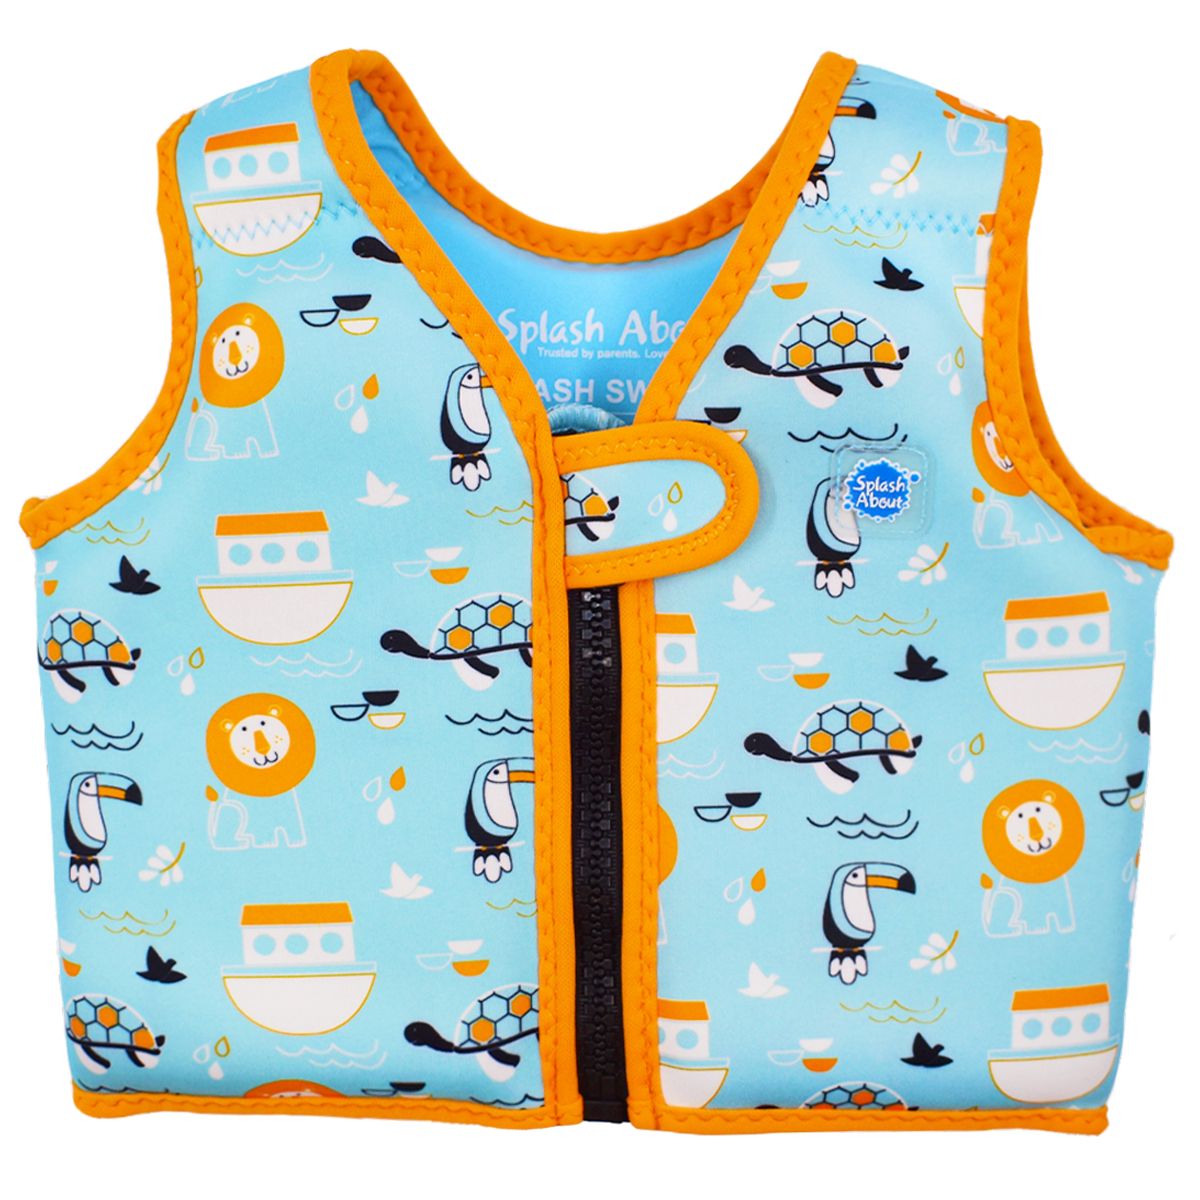 Neoprene swim vest for toddlers with non-removable floats in light blue, orange trims and Noah's Ark themed print. Front.